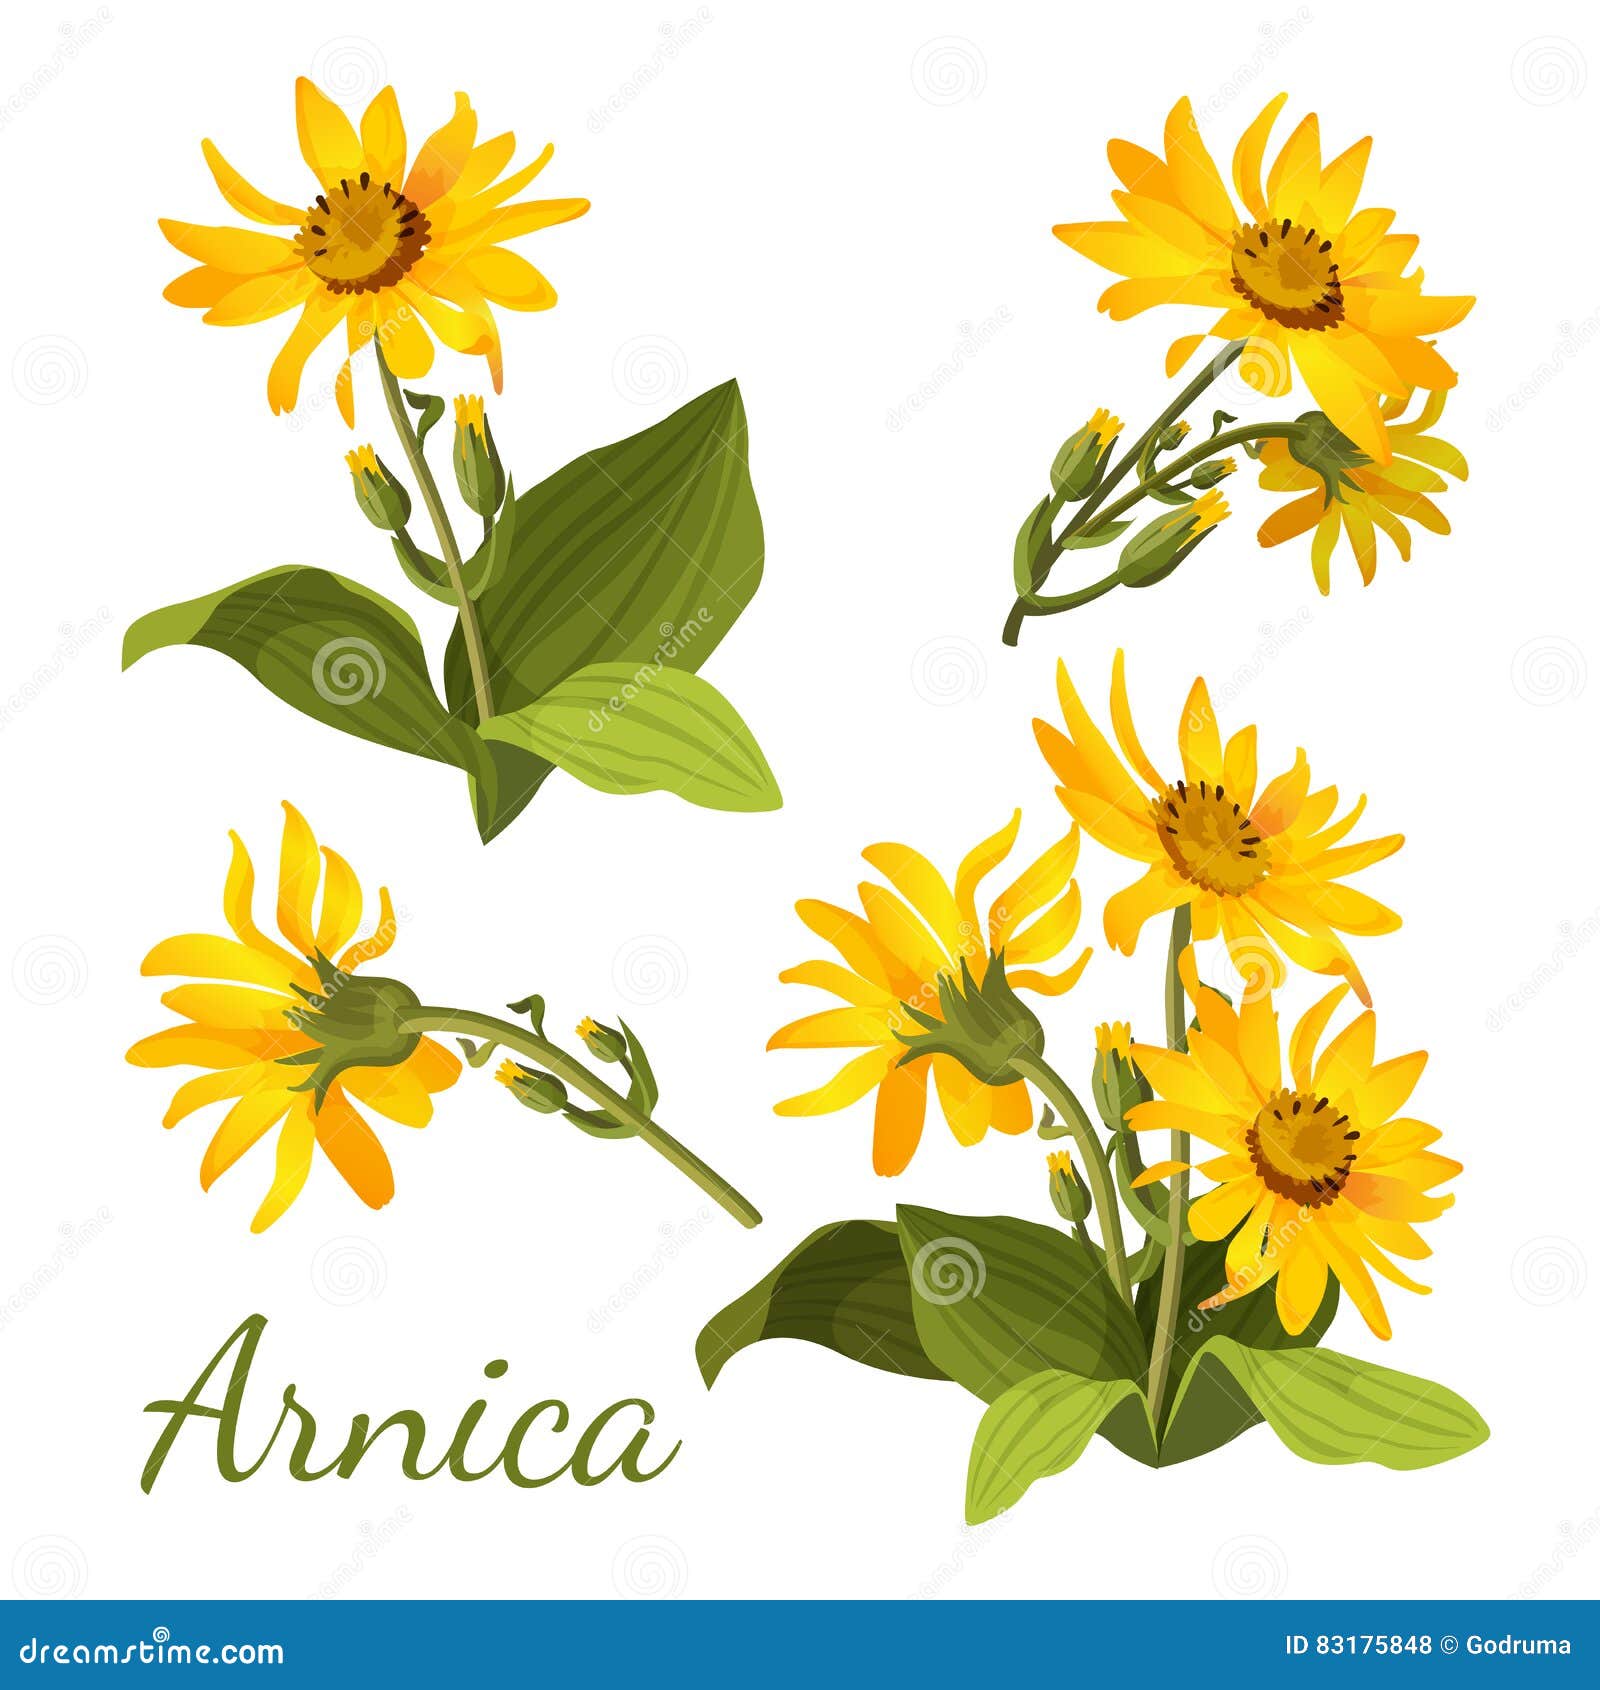 arnica floral composition. set of flowers with leaves, buds and branches.